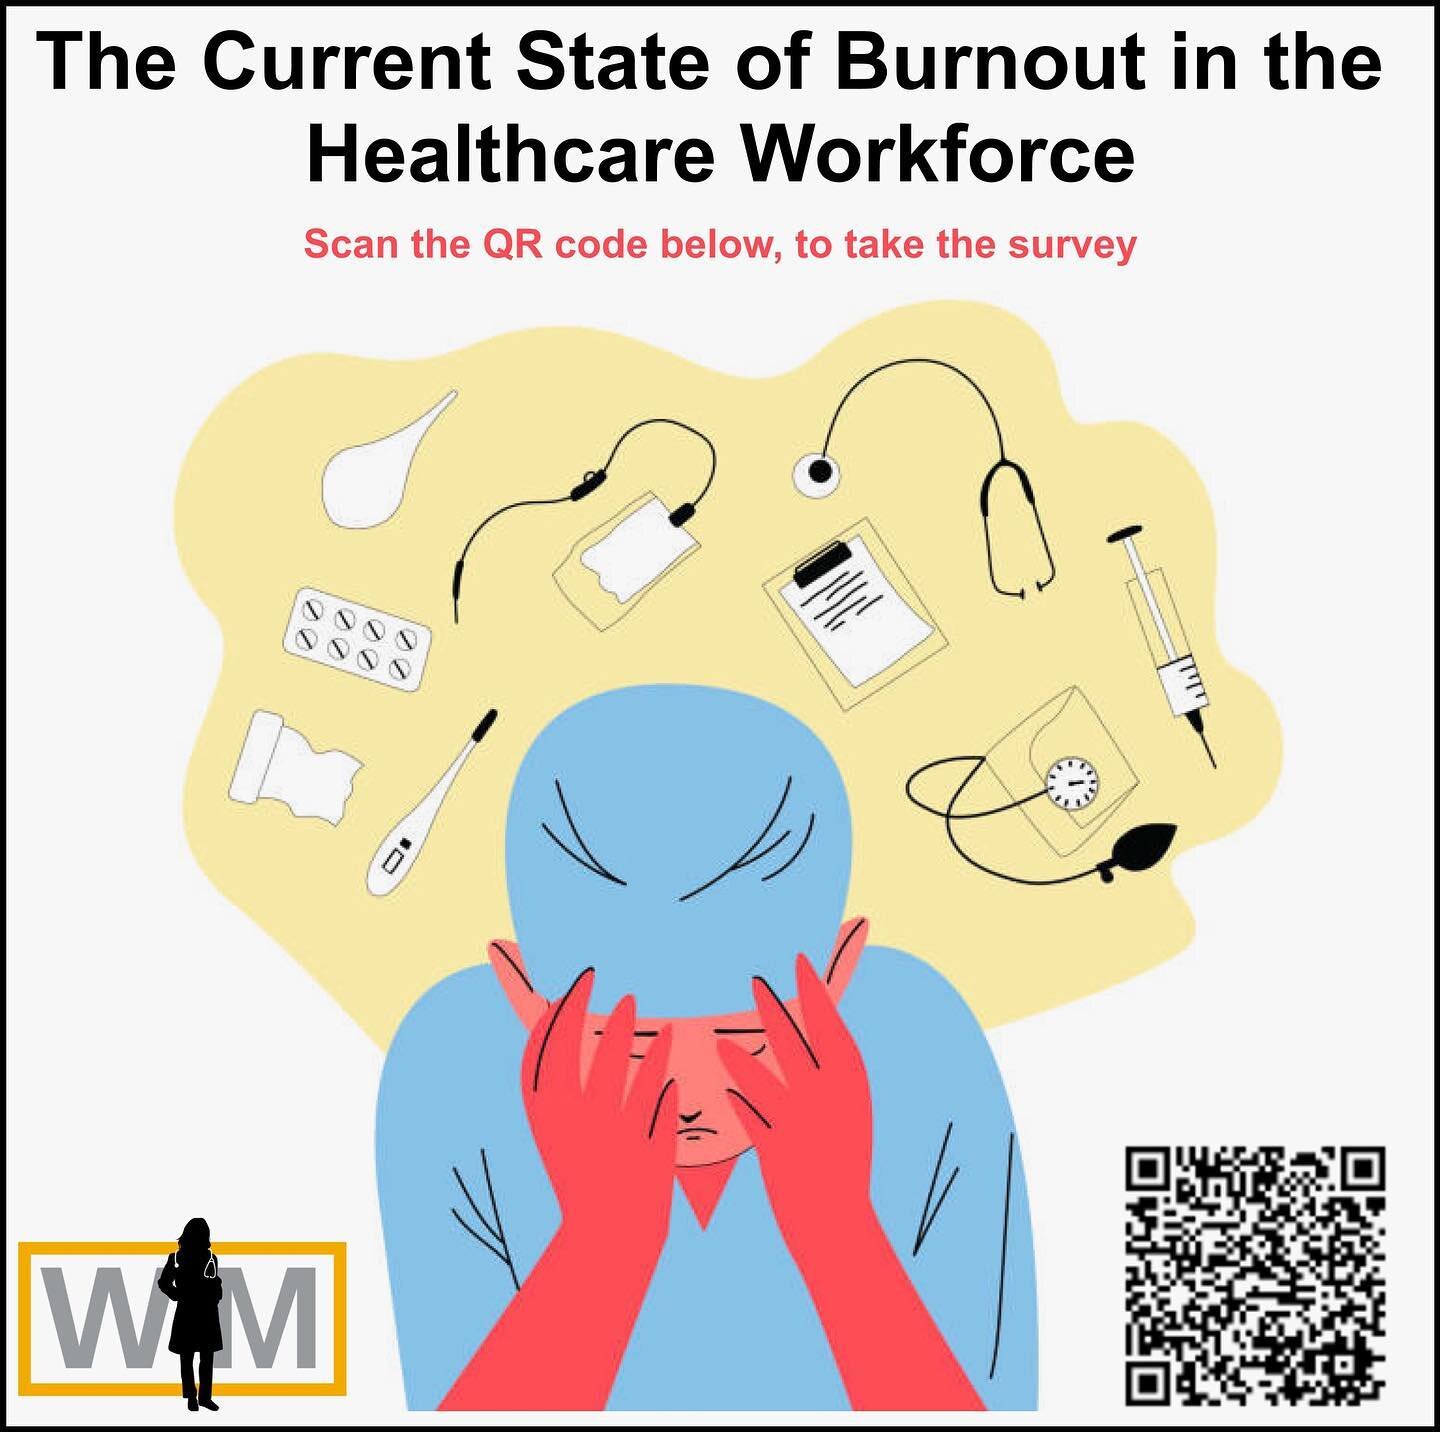 Please contribute to our @WIMSummit study! We would love to have 5 minutes of your time as you share your experience with the residual impacts of the COVID-19 pandemic on the current healthcare workforce. Use this QR code or the link listed either be